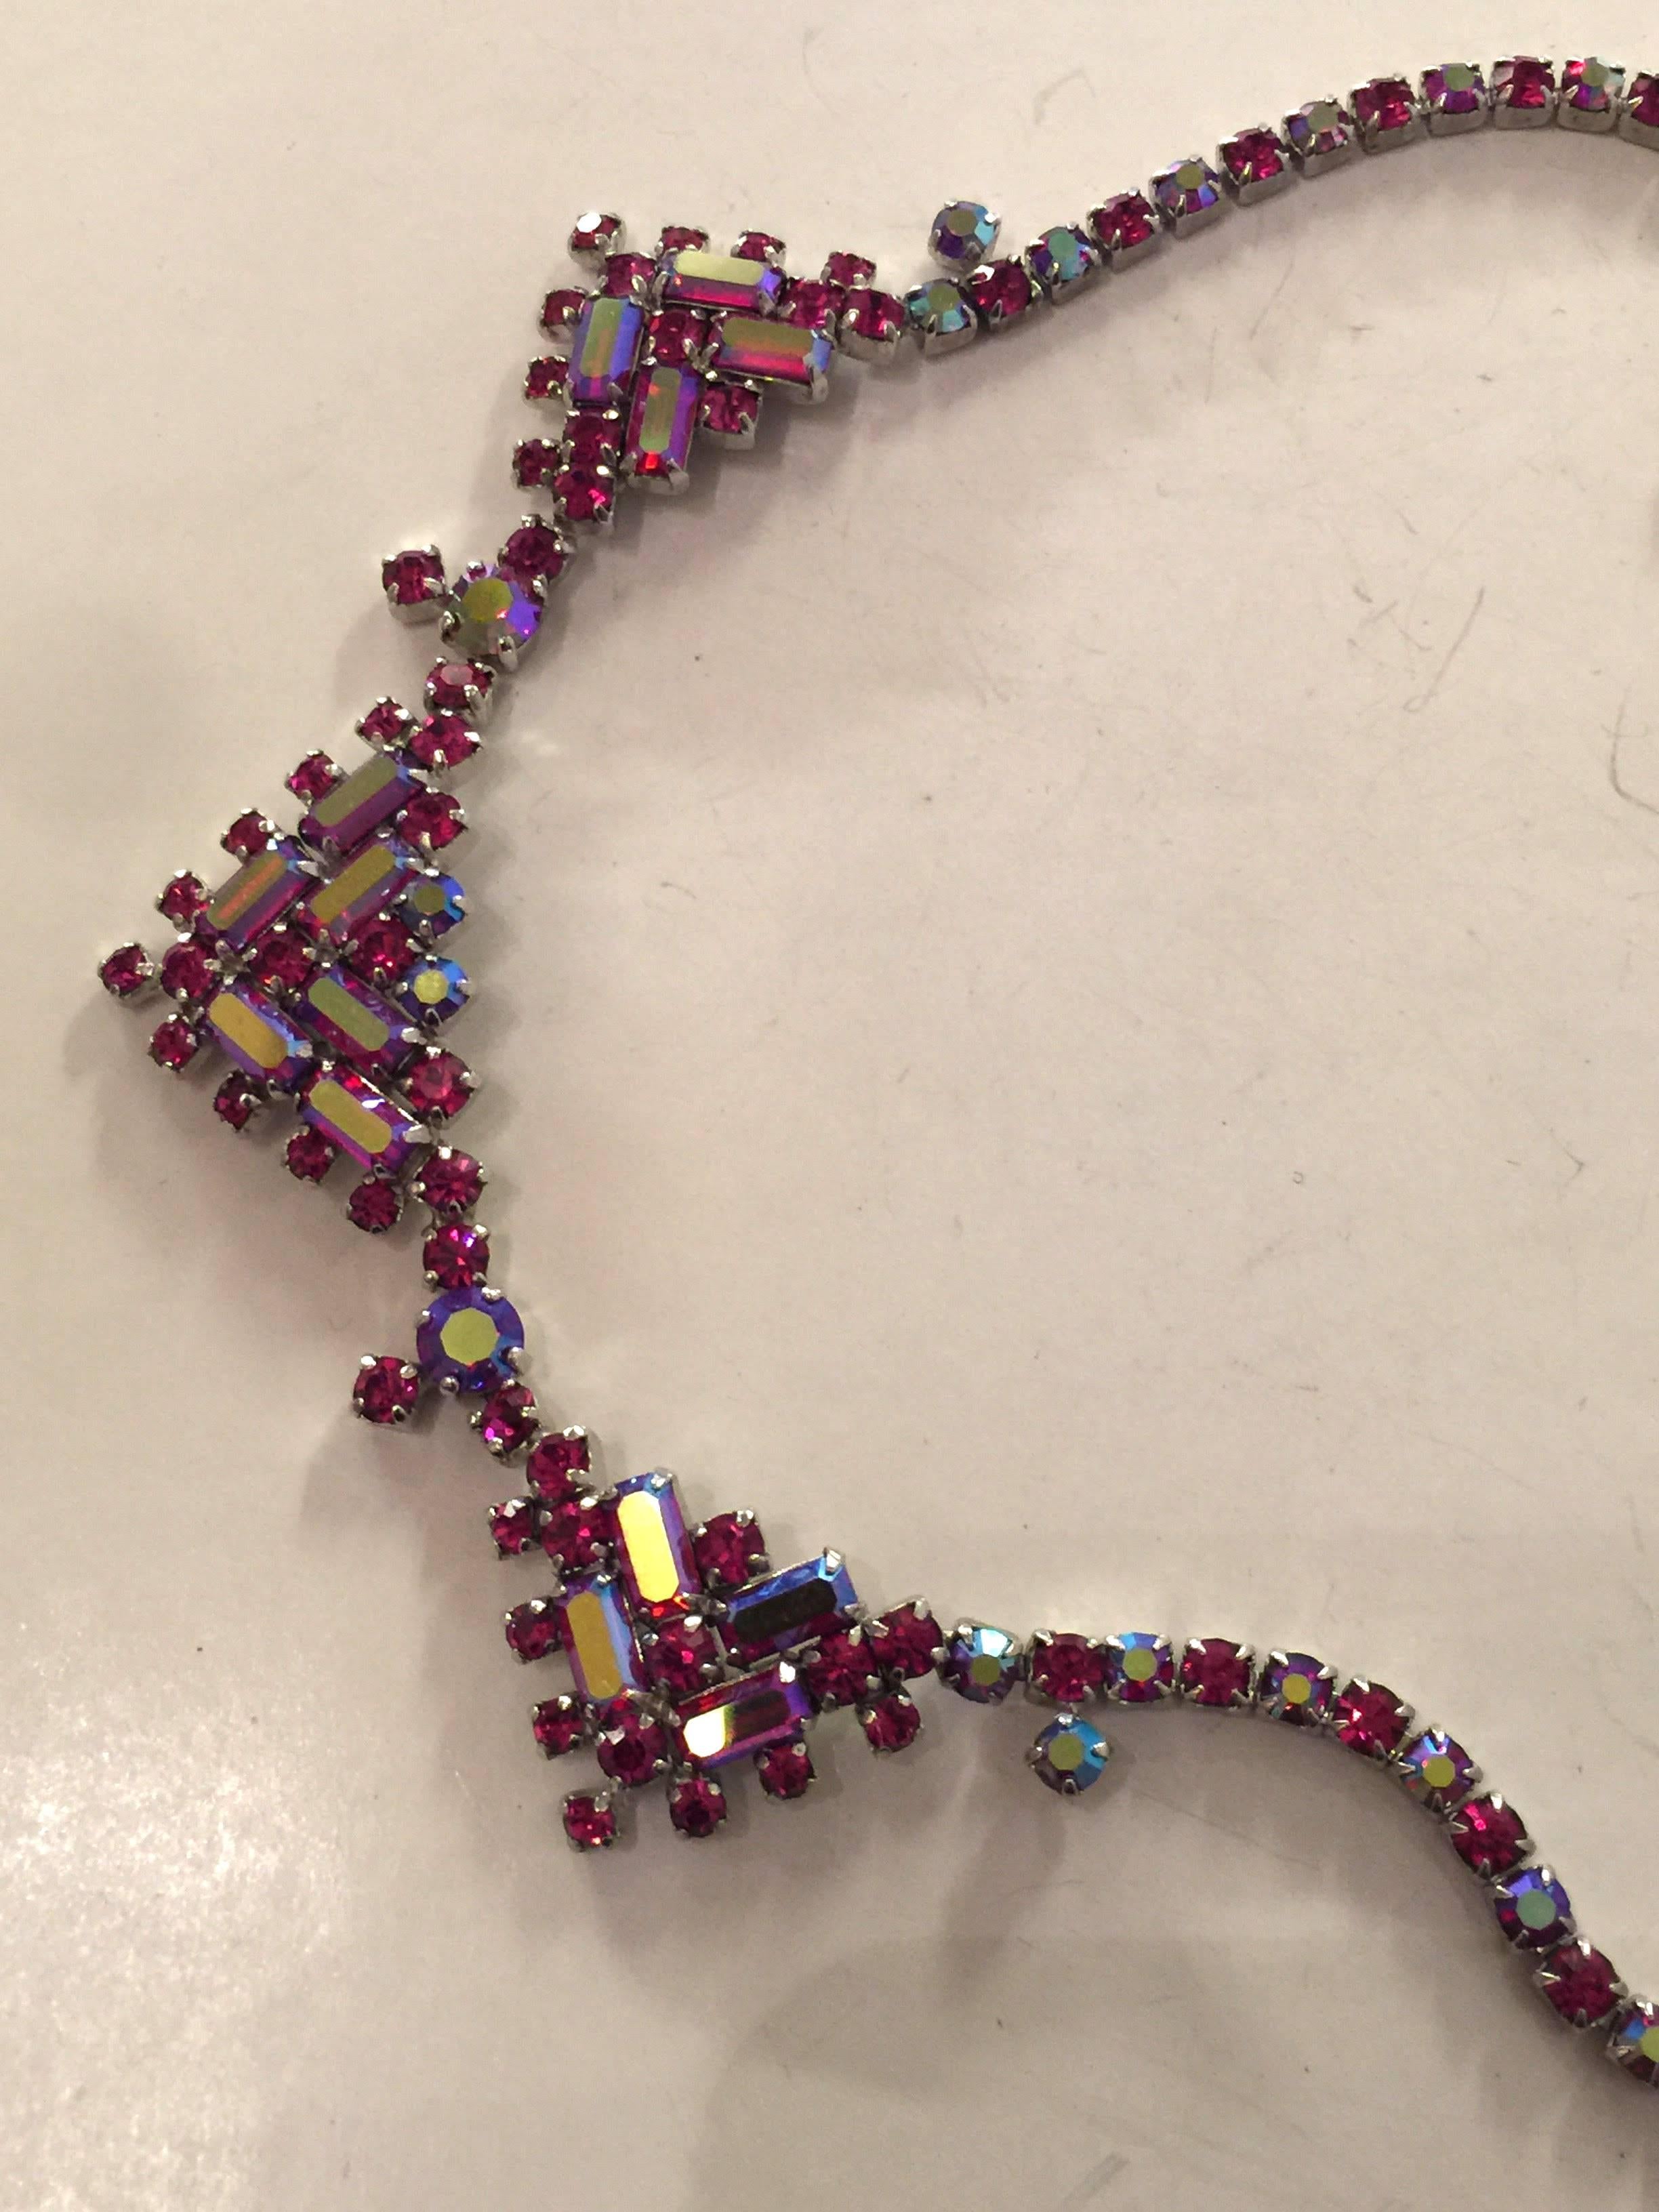 Canada's most collectible designer costume jewelry maker, this 1960s SHERMAN Red Aurora Borealis Geometric Prong Rhinestone Necklace is essentially Sherman in design and tone. A straightforward linear necklace section continues to a central